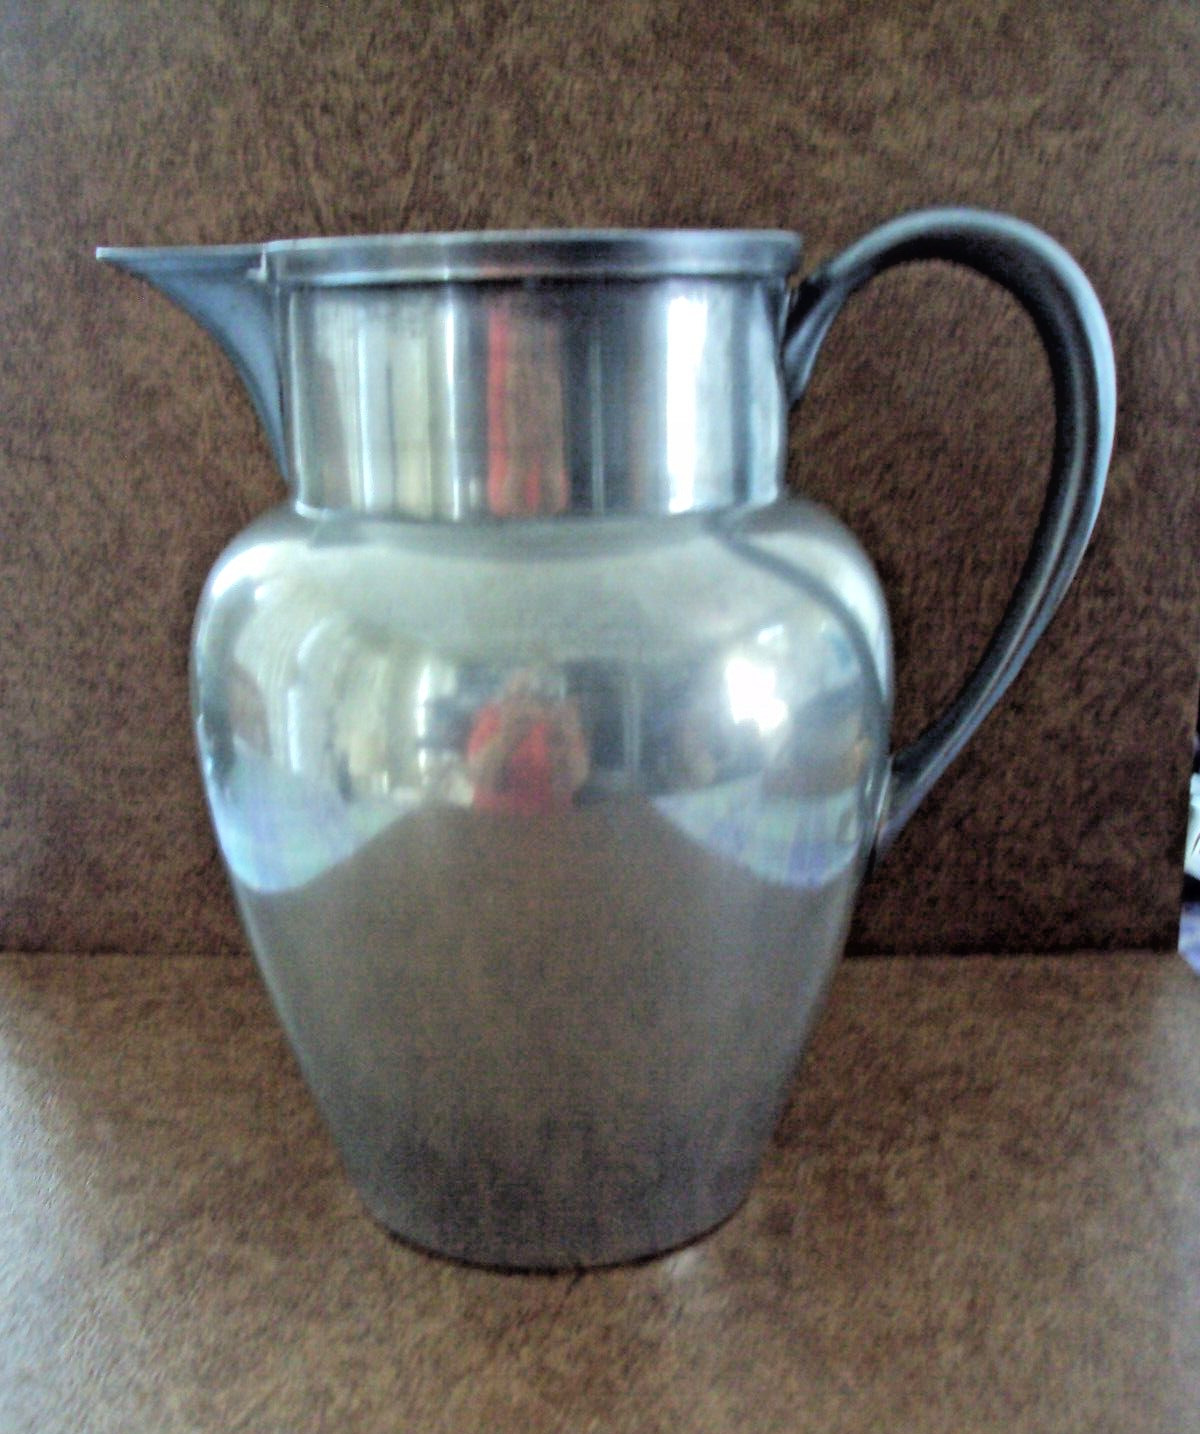 Large Vintage Pewter Pitcher by Pilgrim - Approx. 64 oz. Capacity